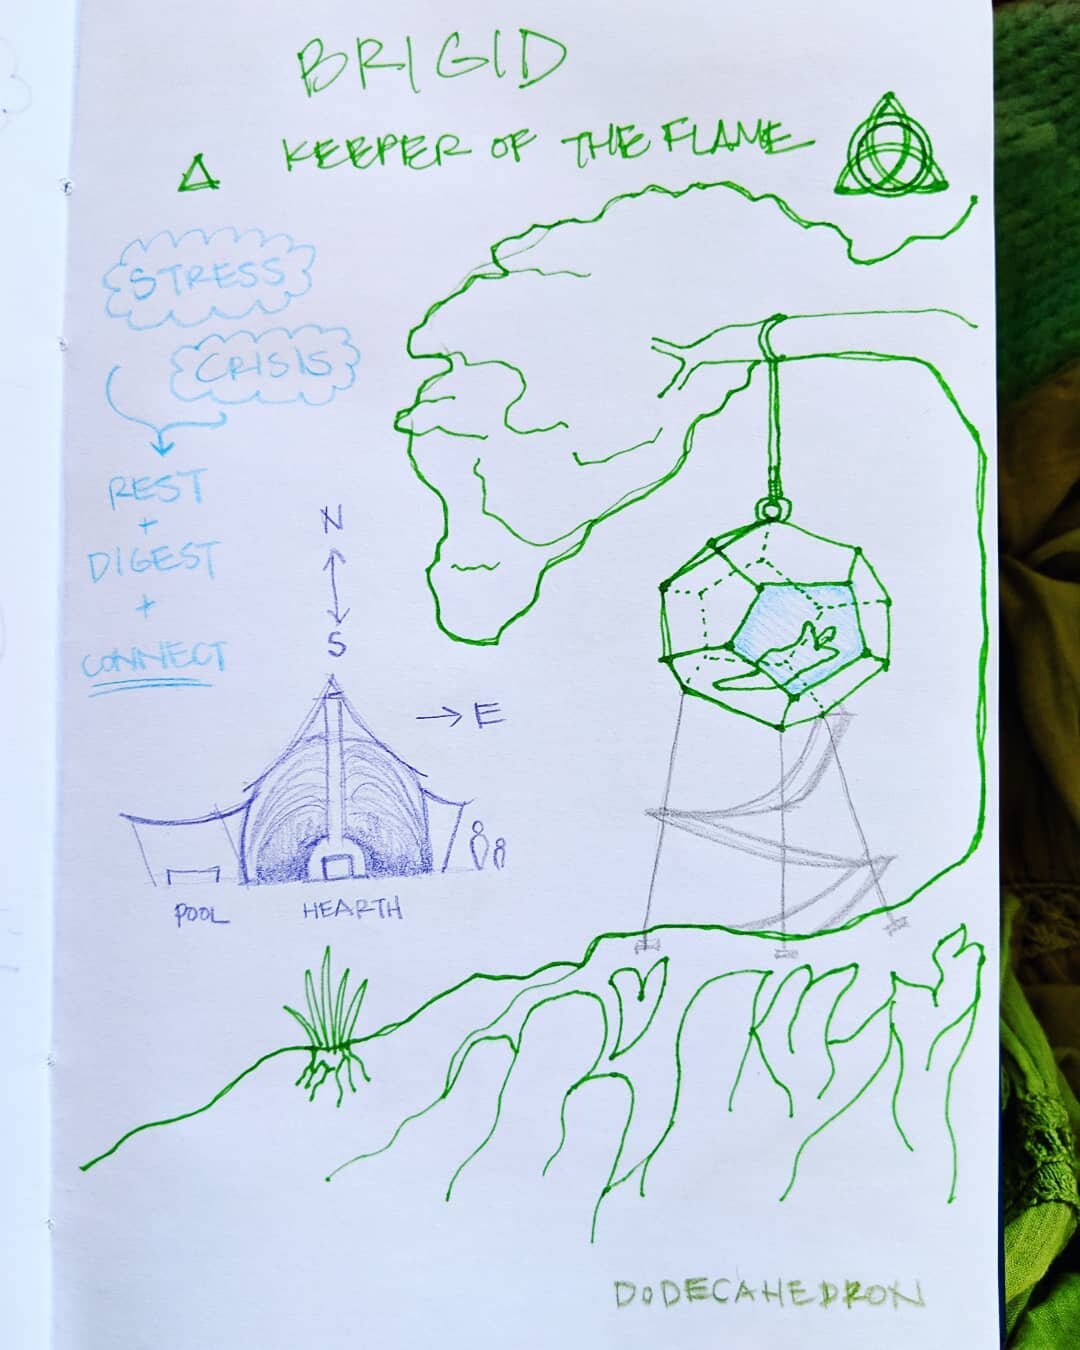 Concept Sketch for Related Sacred Spaces - a chapel and meditation pod based on the sacred geometry of the dodecahedron, the four elements (earth, air, fire, water), and the four cardinal directions.
.
In our fast-paced world of tech, stress and stra